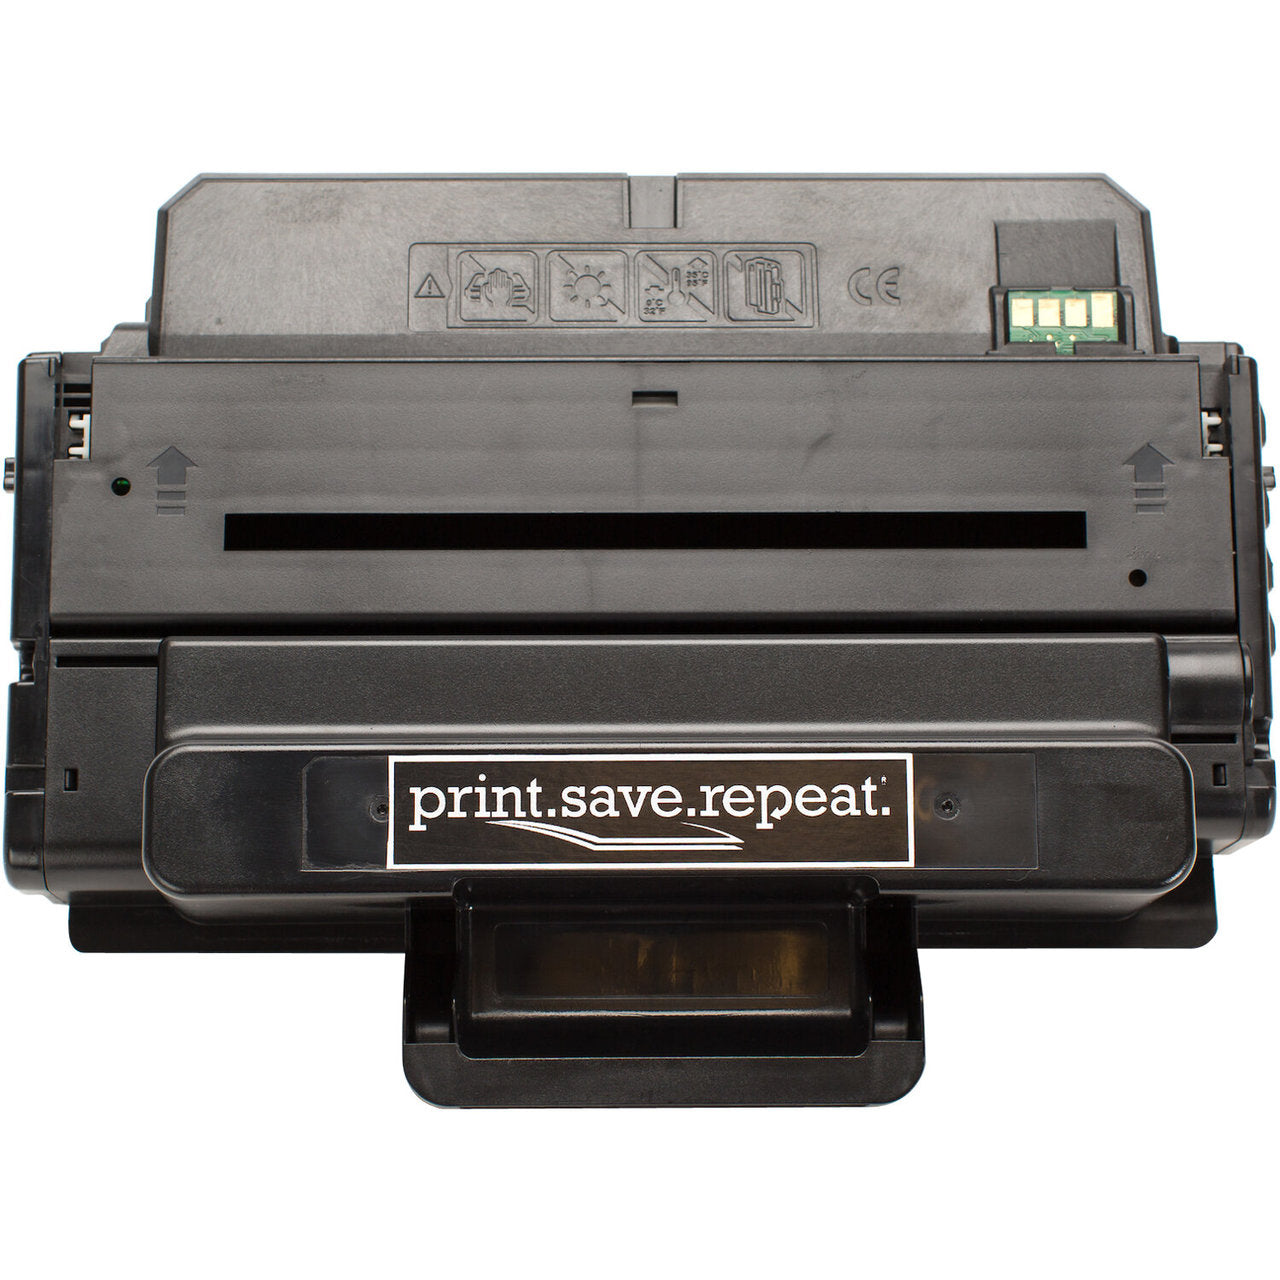 Print.Save.Repeat. Samsung MLT-D205E Extra High Yield Remanufactured Toner Cartridge for ML-3710, ML-3712, SCX-5637, SCX-5639, SCX-5737, SCX-5739 [10,000 Pages]